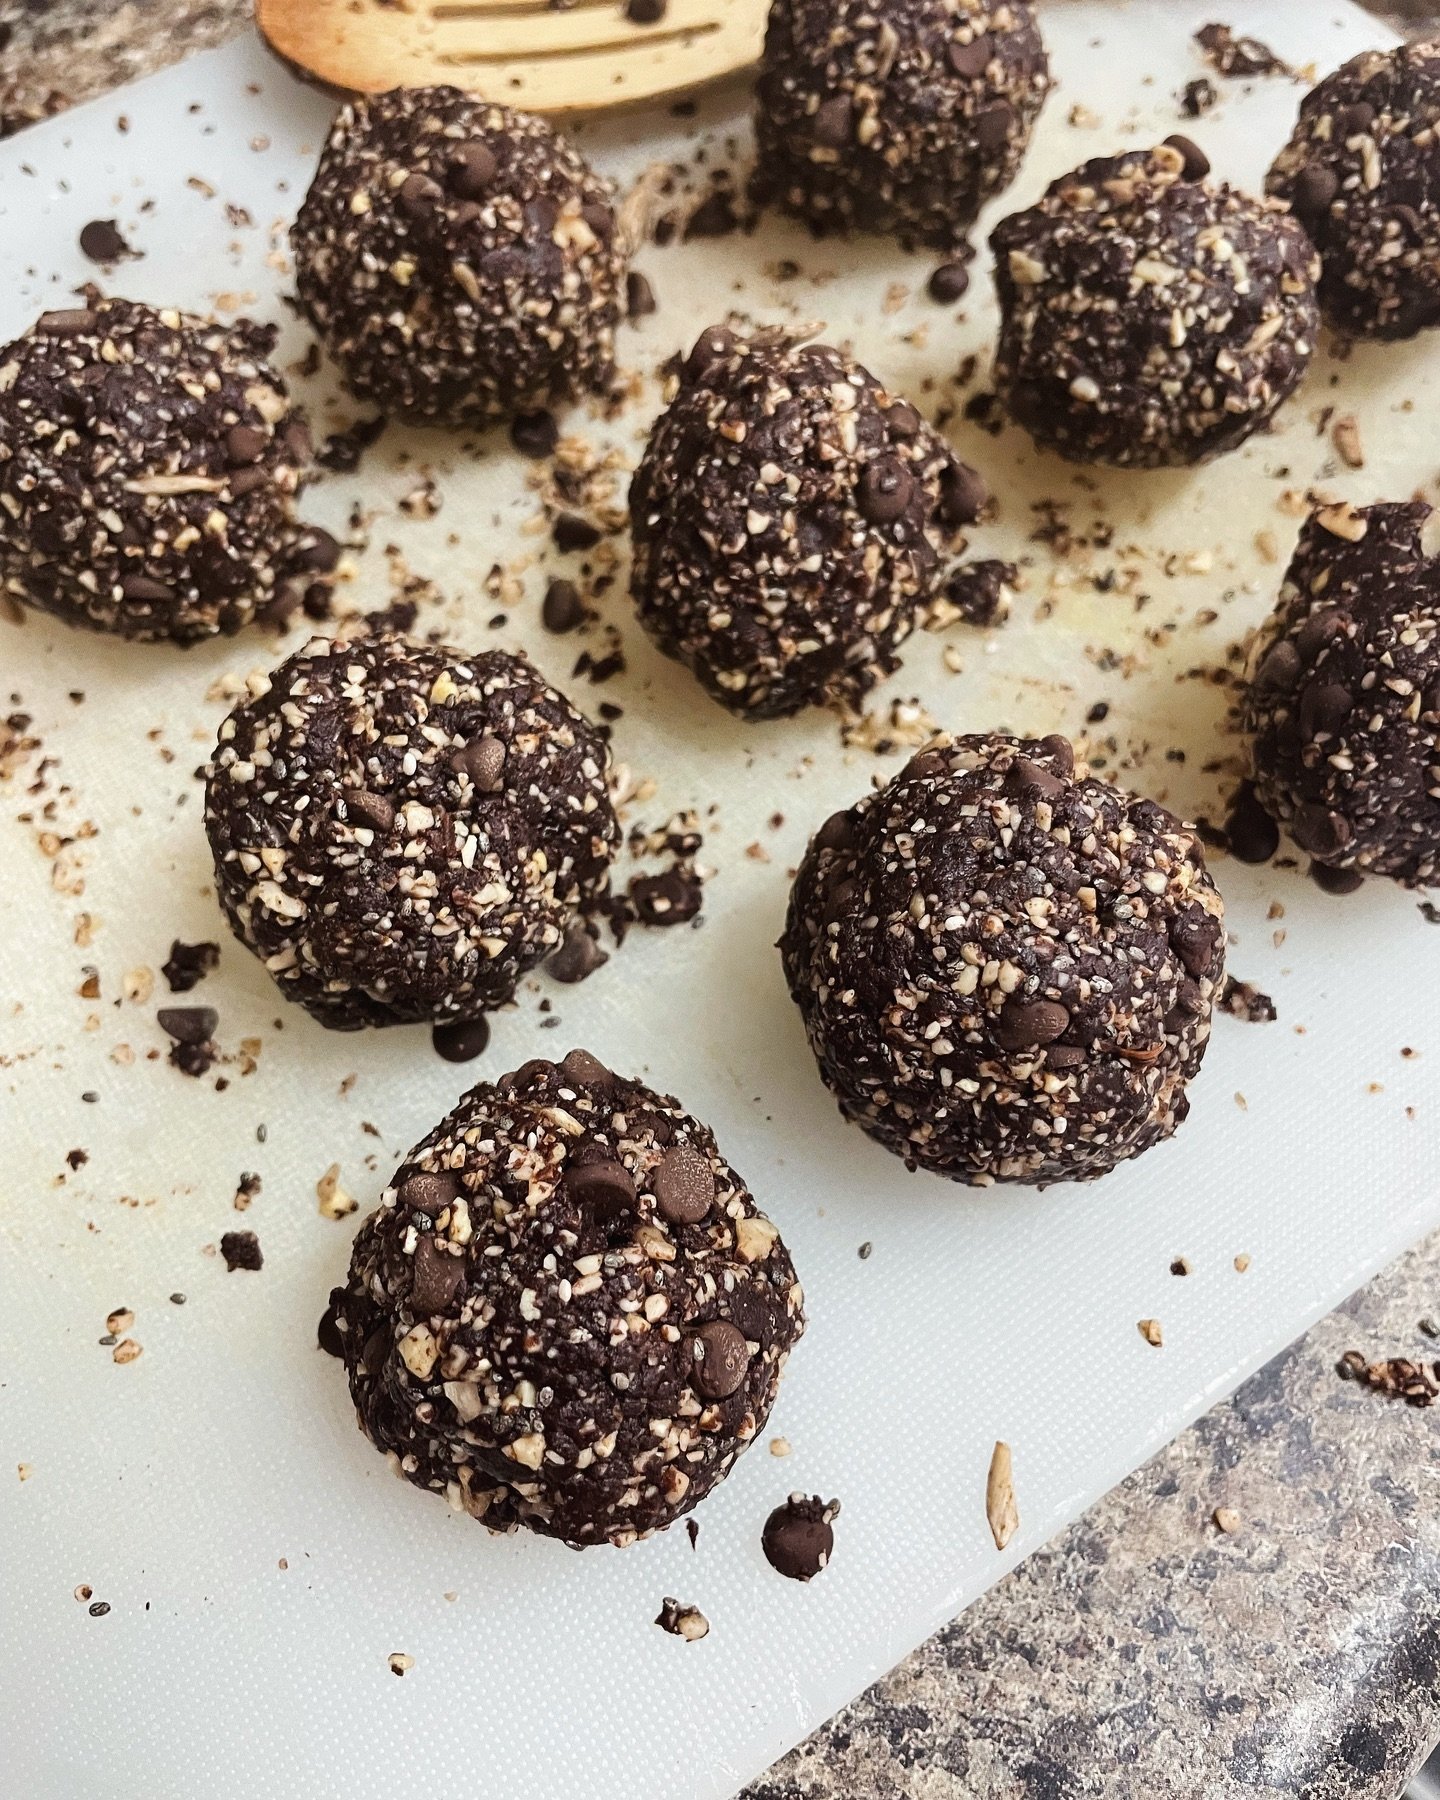 Bliss Ball Recipe (GF, DF, VG)

These seedy bliss balls are so simple to make but so delicious! They&rsquo;re also packed with fibre, omega-3 fatty acids, vitamins and minerals so it&rsquo;s a great nutritious snack you can prep for the week 🙌🏼

In